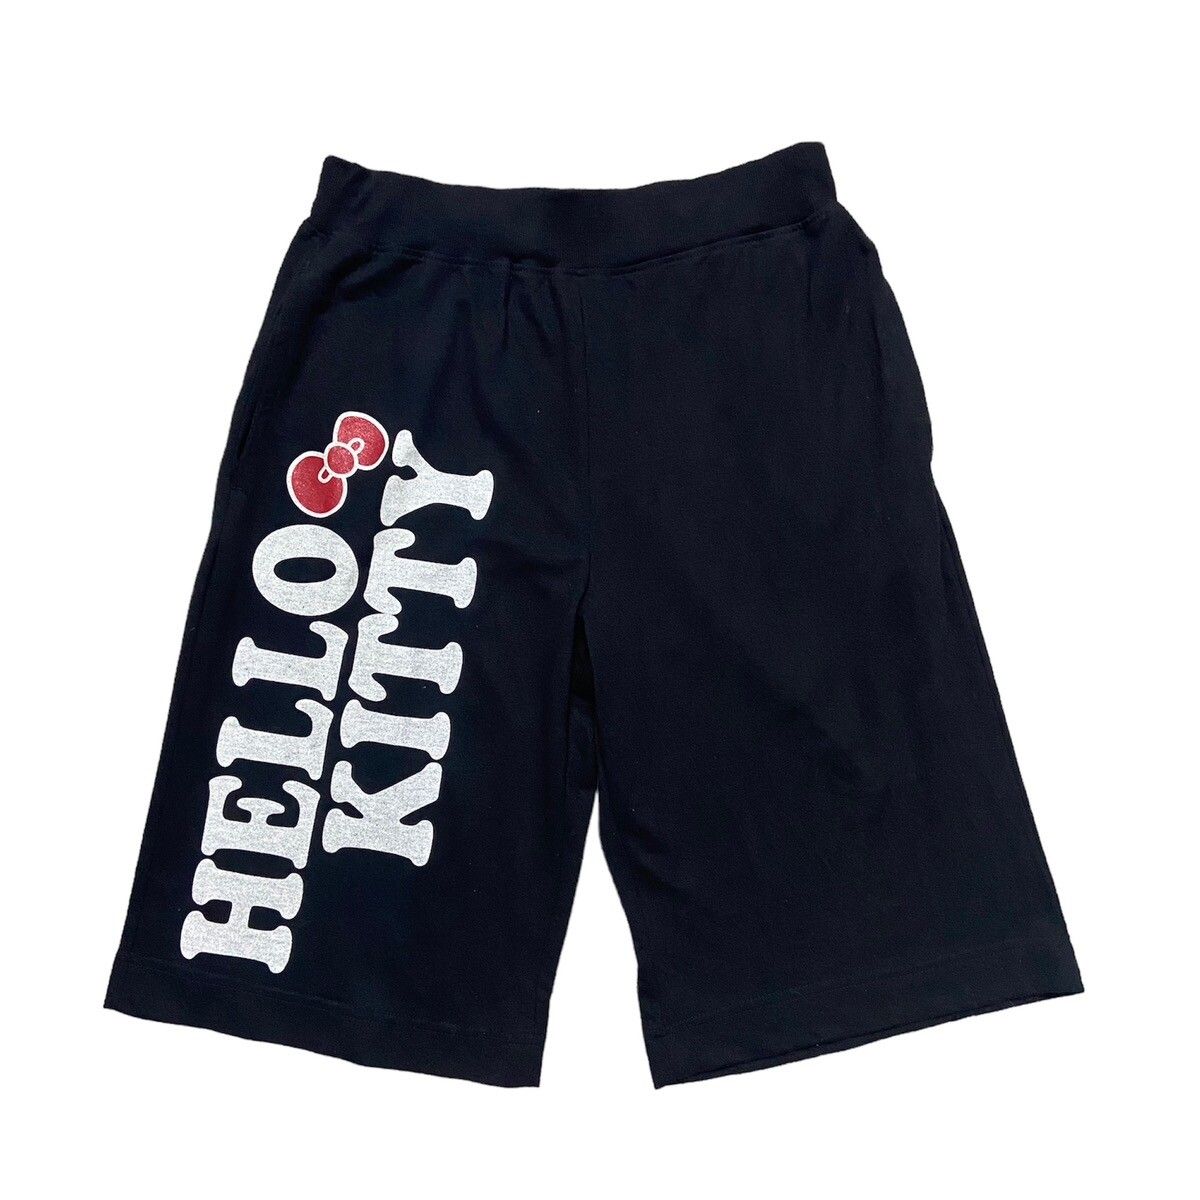 Japanese Brand - Hello Kitty For Sale in Japan Only Shorts - 1